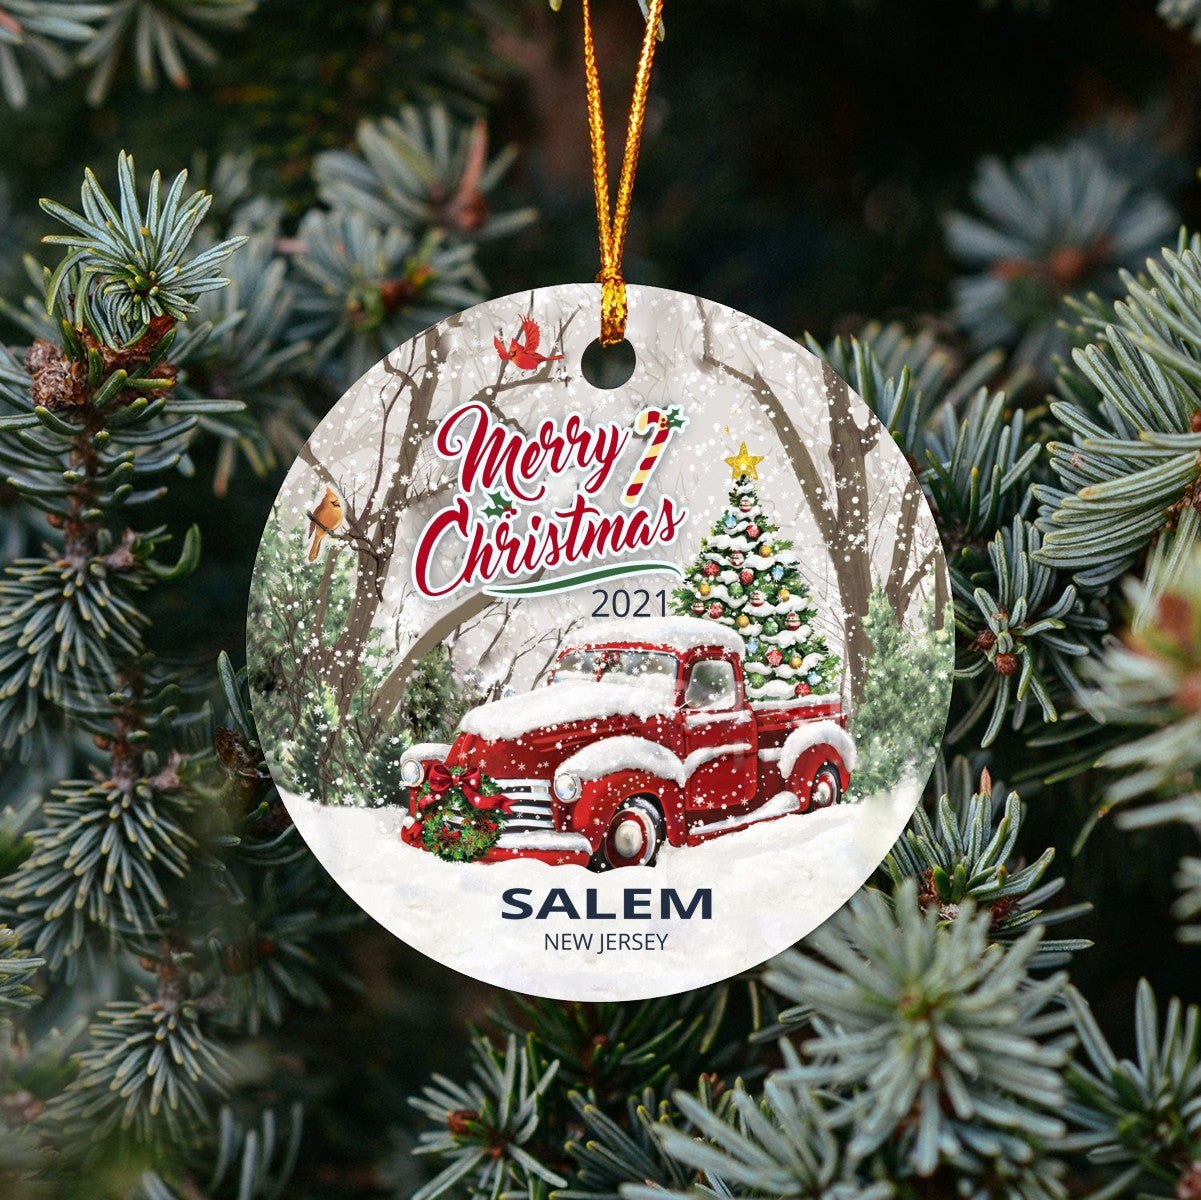 Christmas Tree Ornaments Salem - Ornament With Name City, State Salem New Jersey NJ Ornament - Red Truck Xmas Ornaments 3'' Plastic Gift For Family, Friend And Housewarming